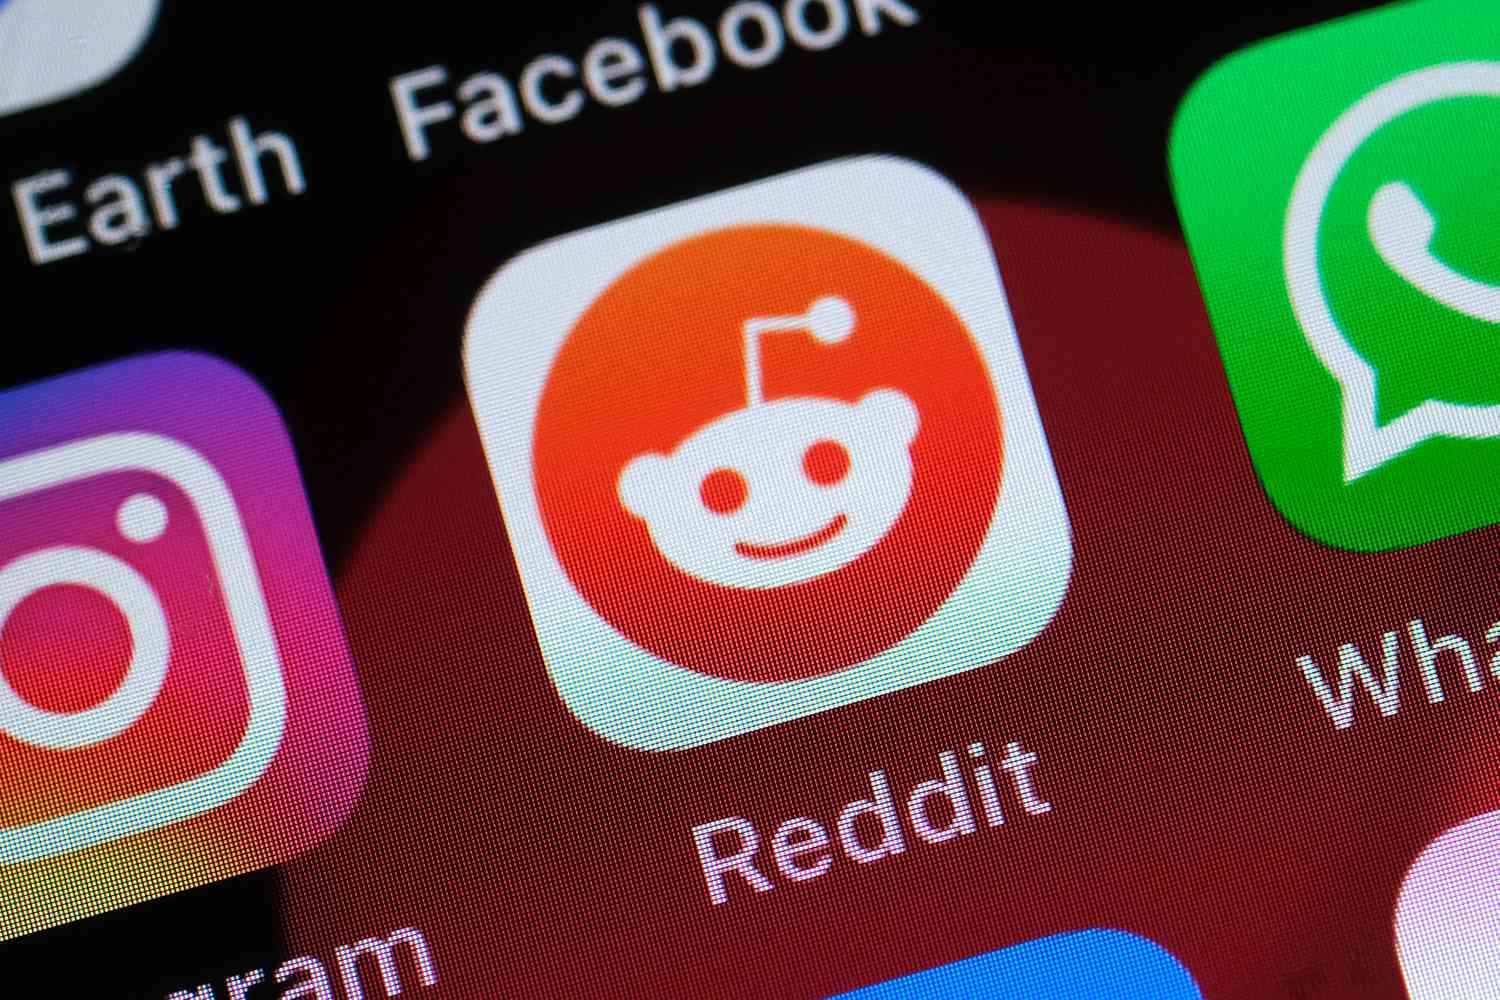 Social Media Platform Reddit Discloses Bitcoin (BTC) and Ether (ETH) Holding in IPO Filing